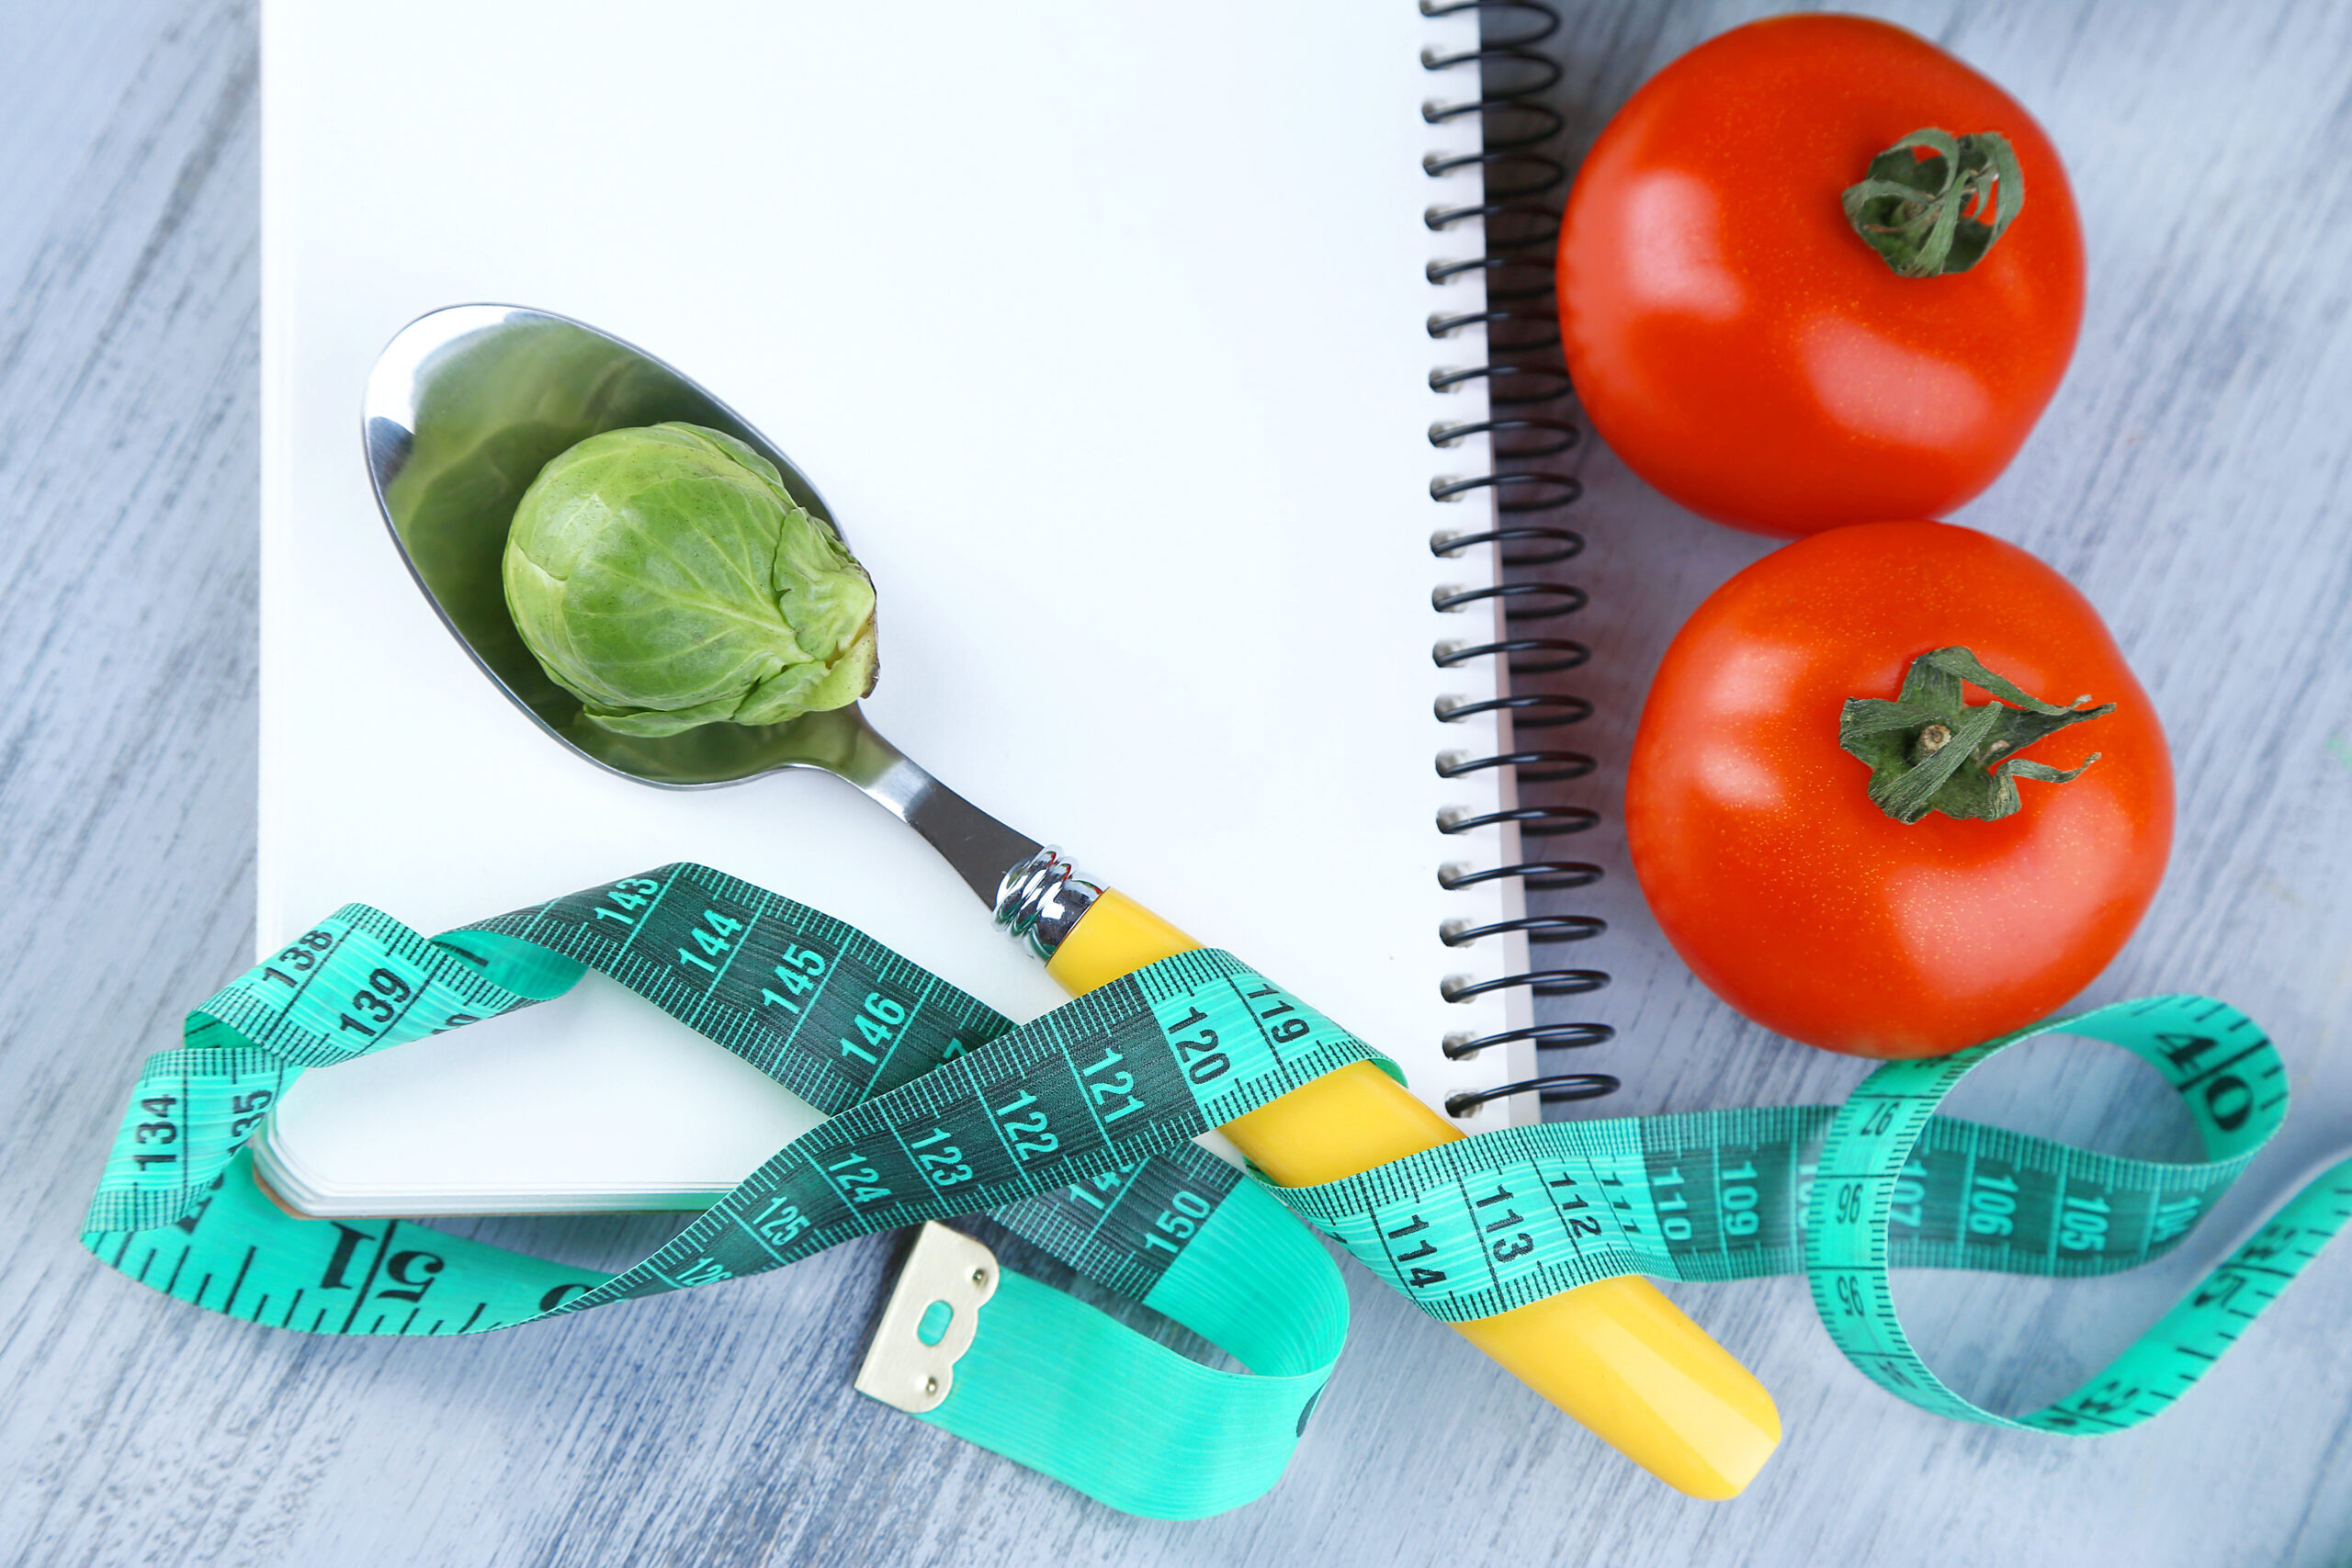 Notebook,With,Measuring,Tape,And,Vegetables,On,Wooden,Background